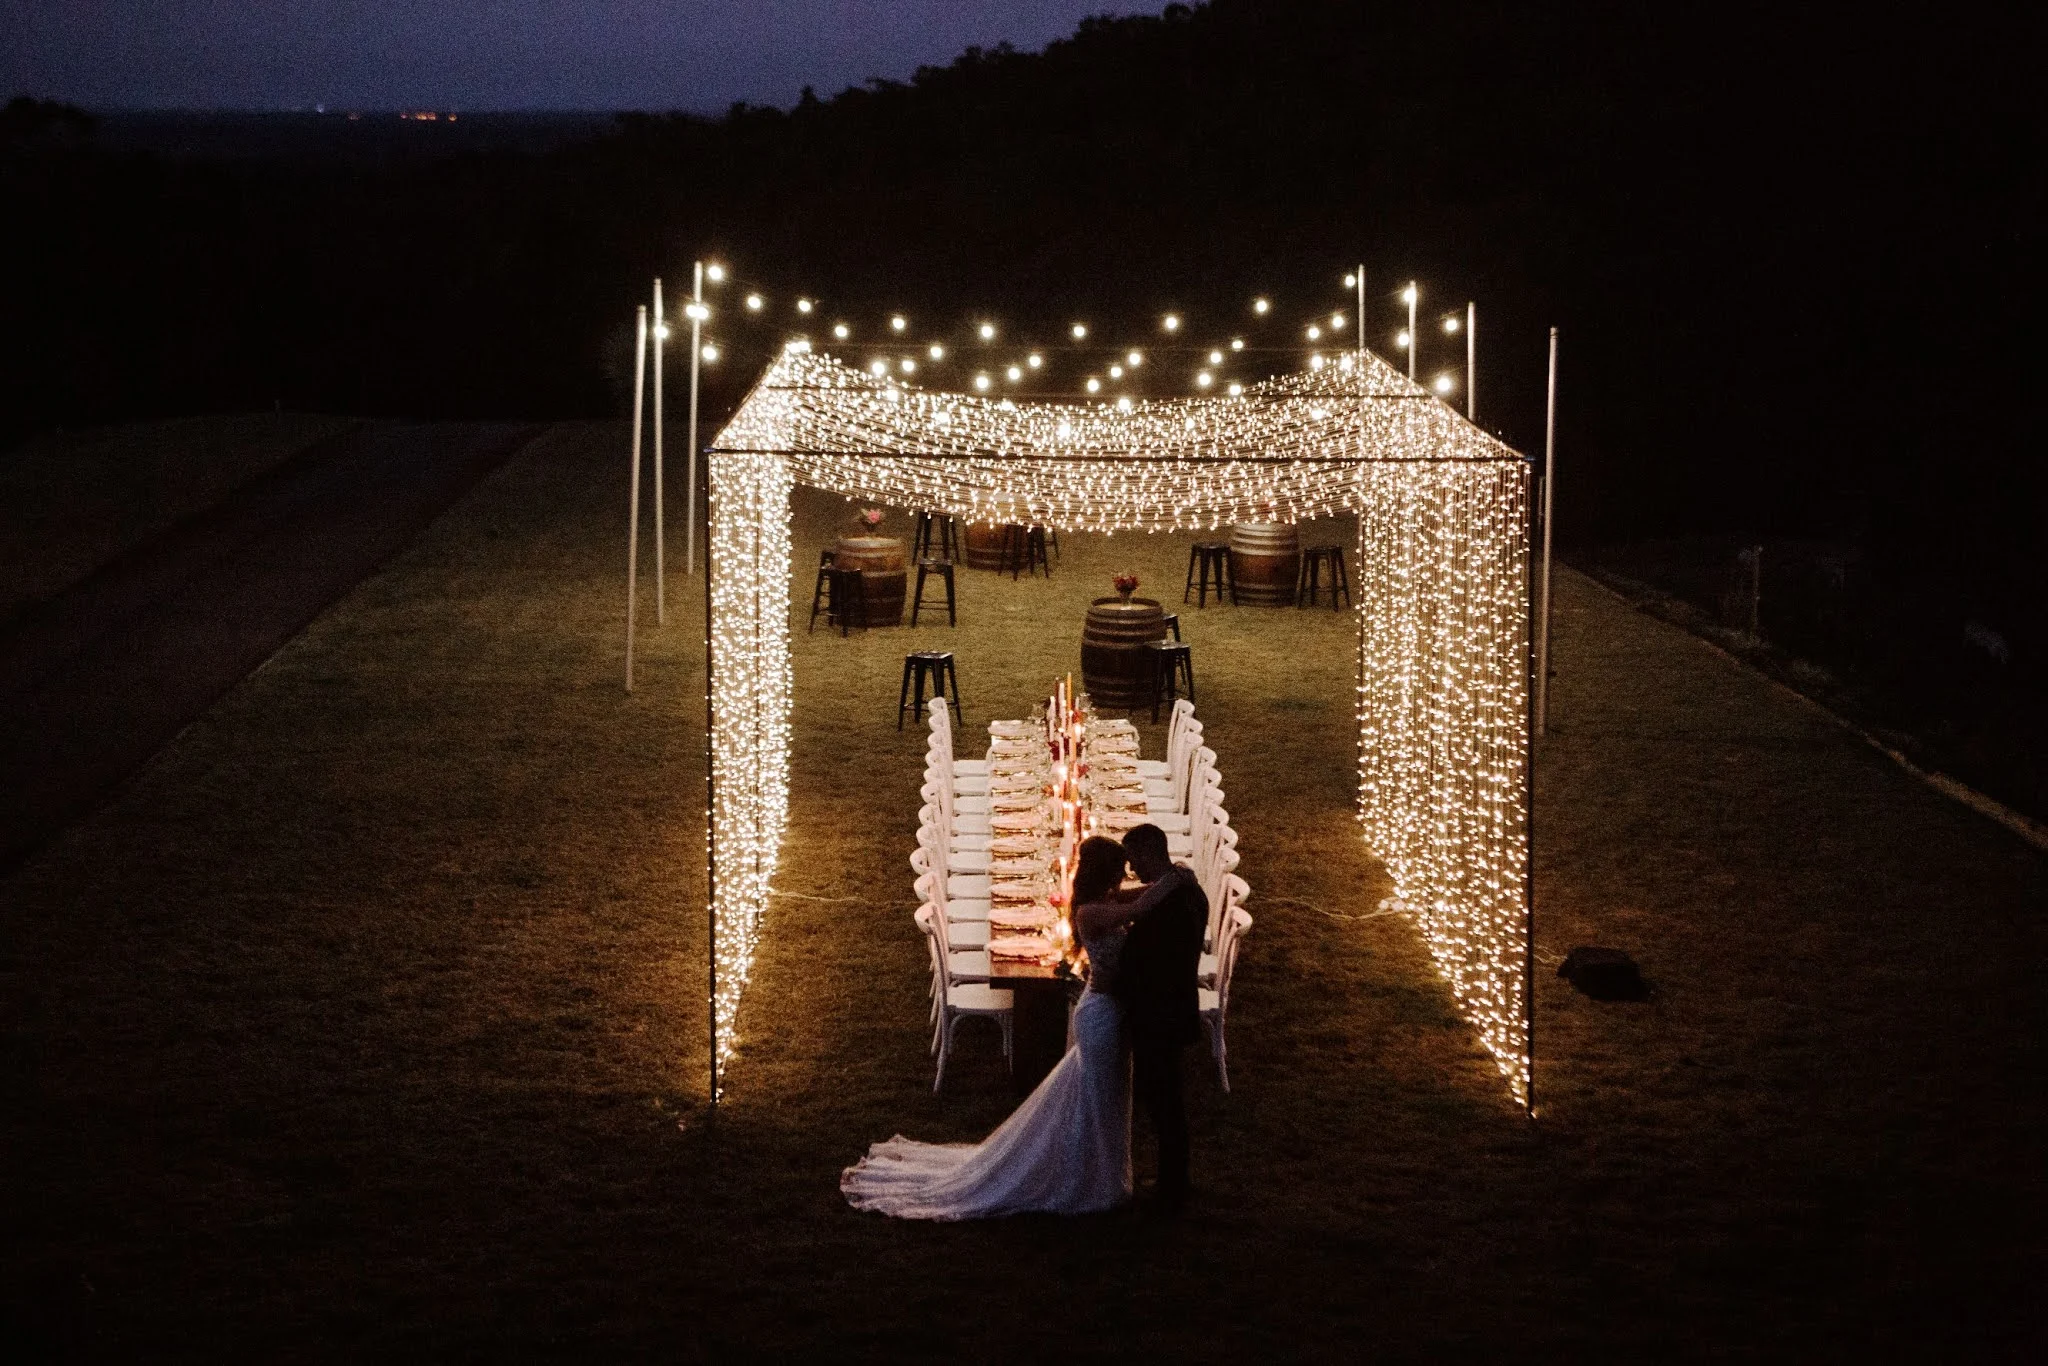 Kayla Temple Photography festoon lighting bridal gowns tablestyling